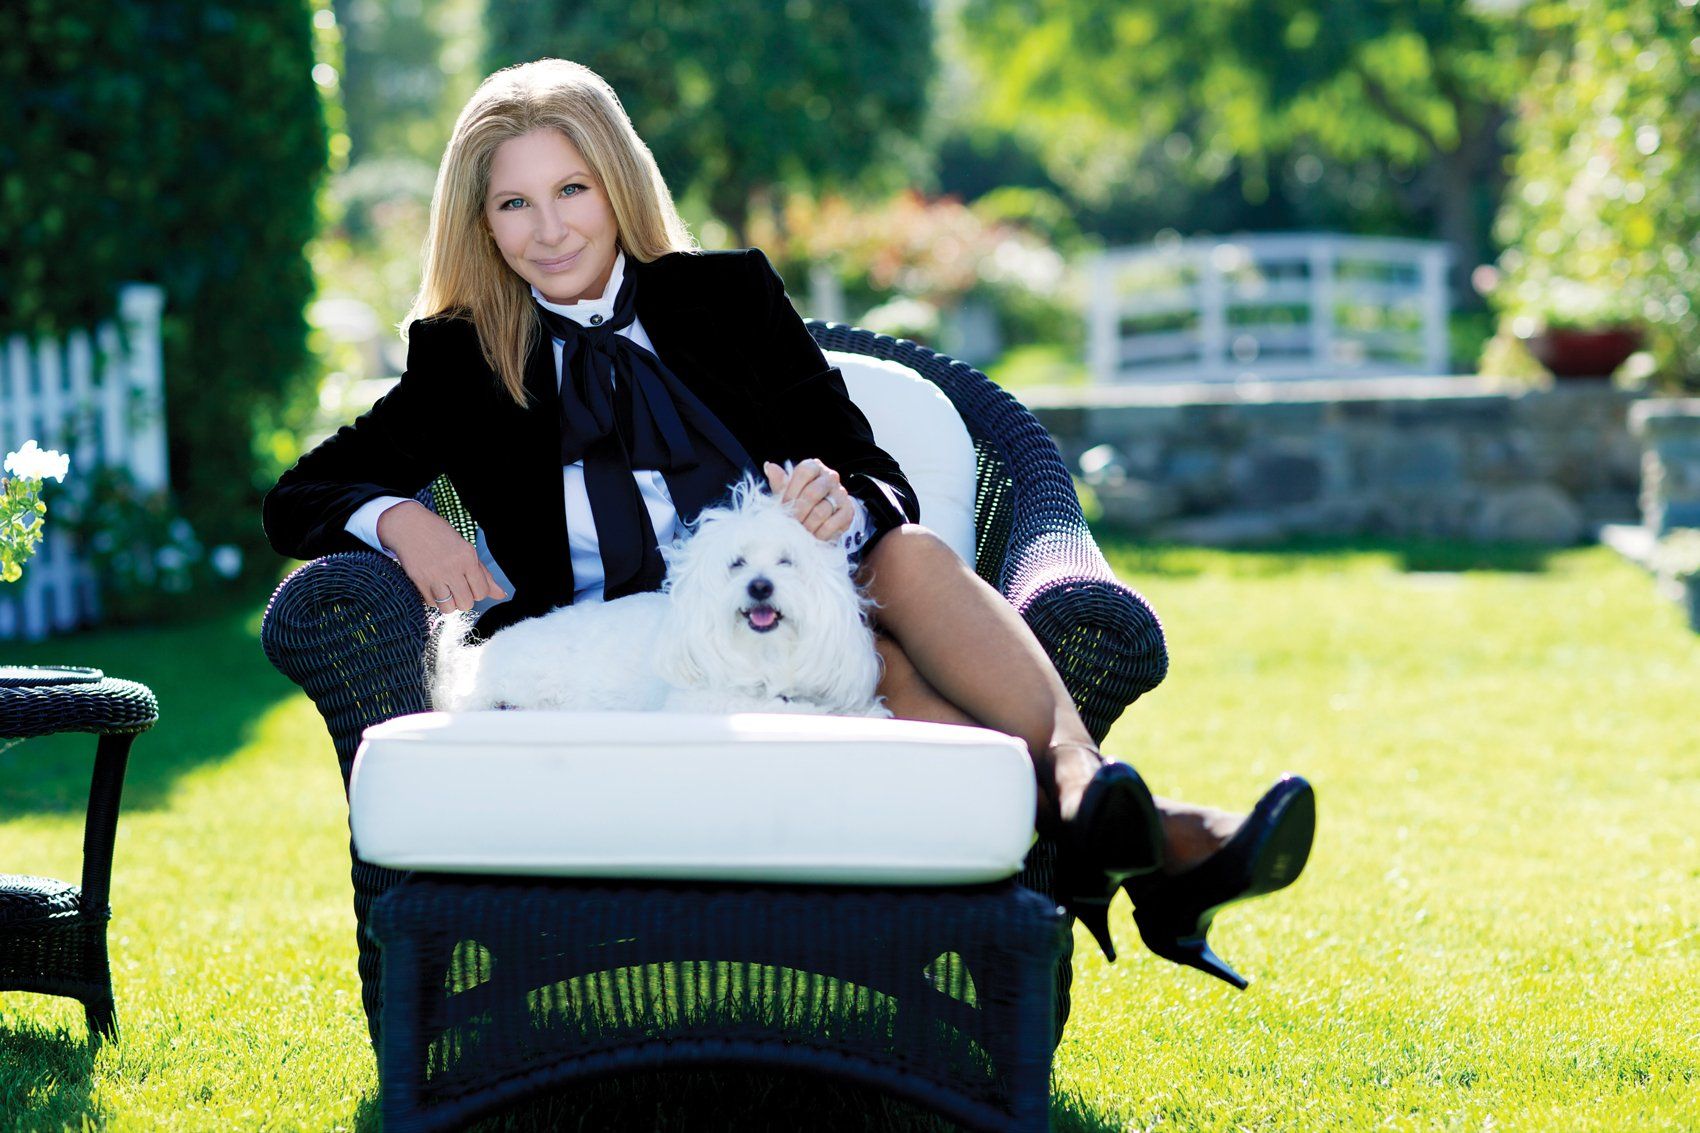 The full, uncropped photo used on the cover of Streisand's Partners album.  Photo by: Russell James